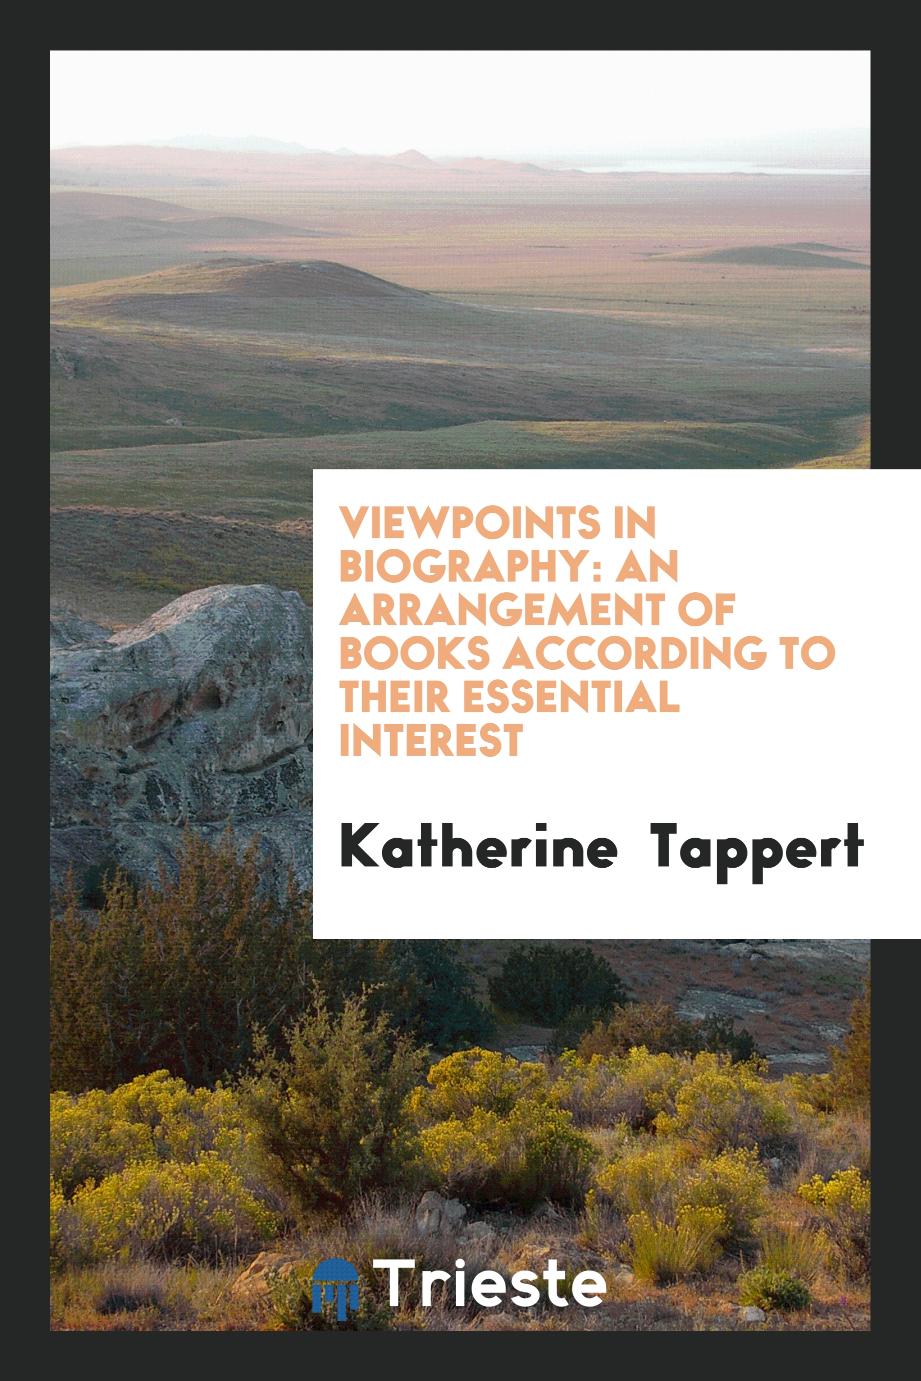 Viewpoints in Biography: An Arrangement of Books According to Their Essential Interest